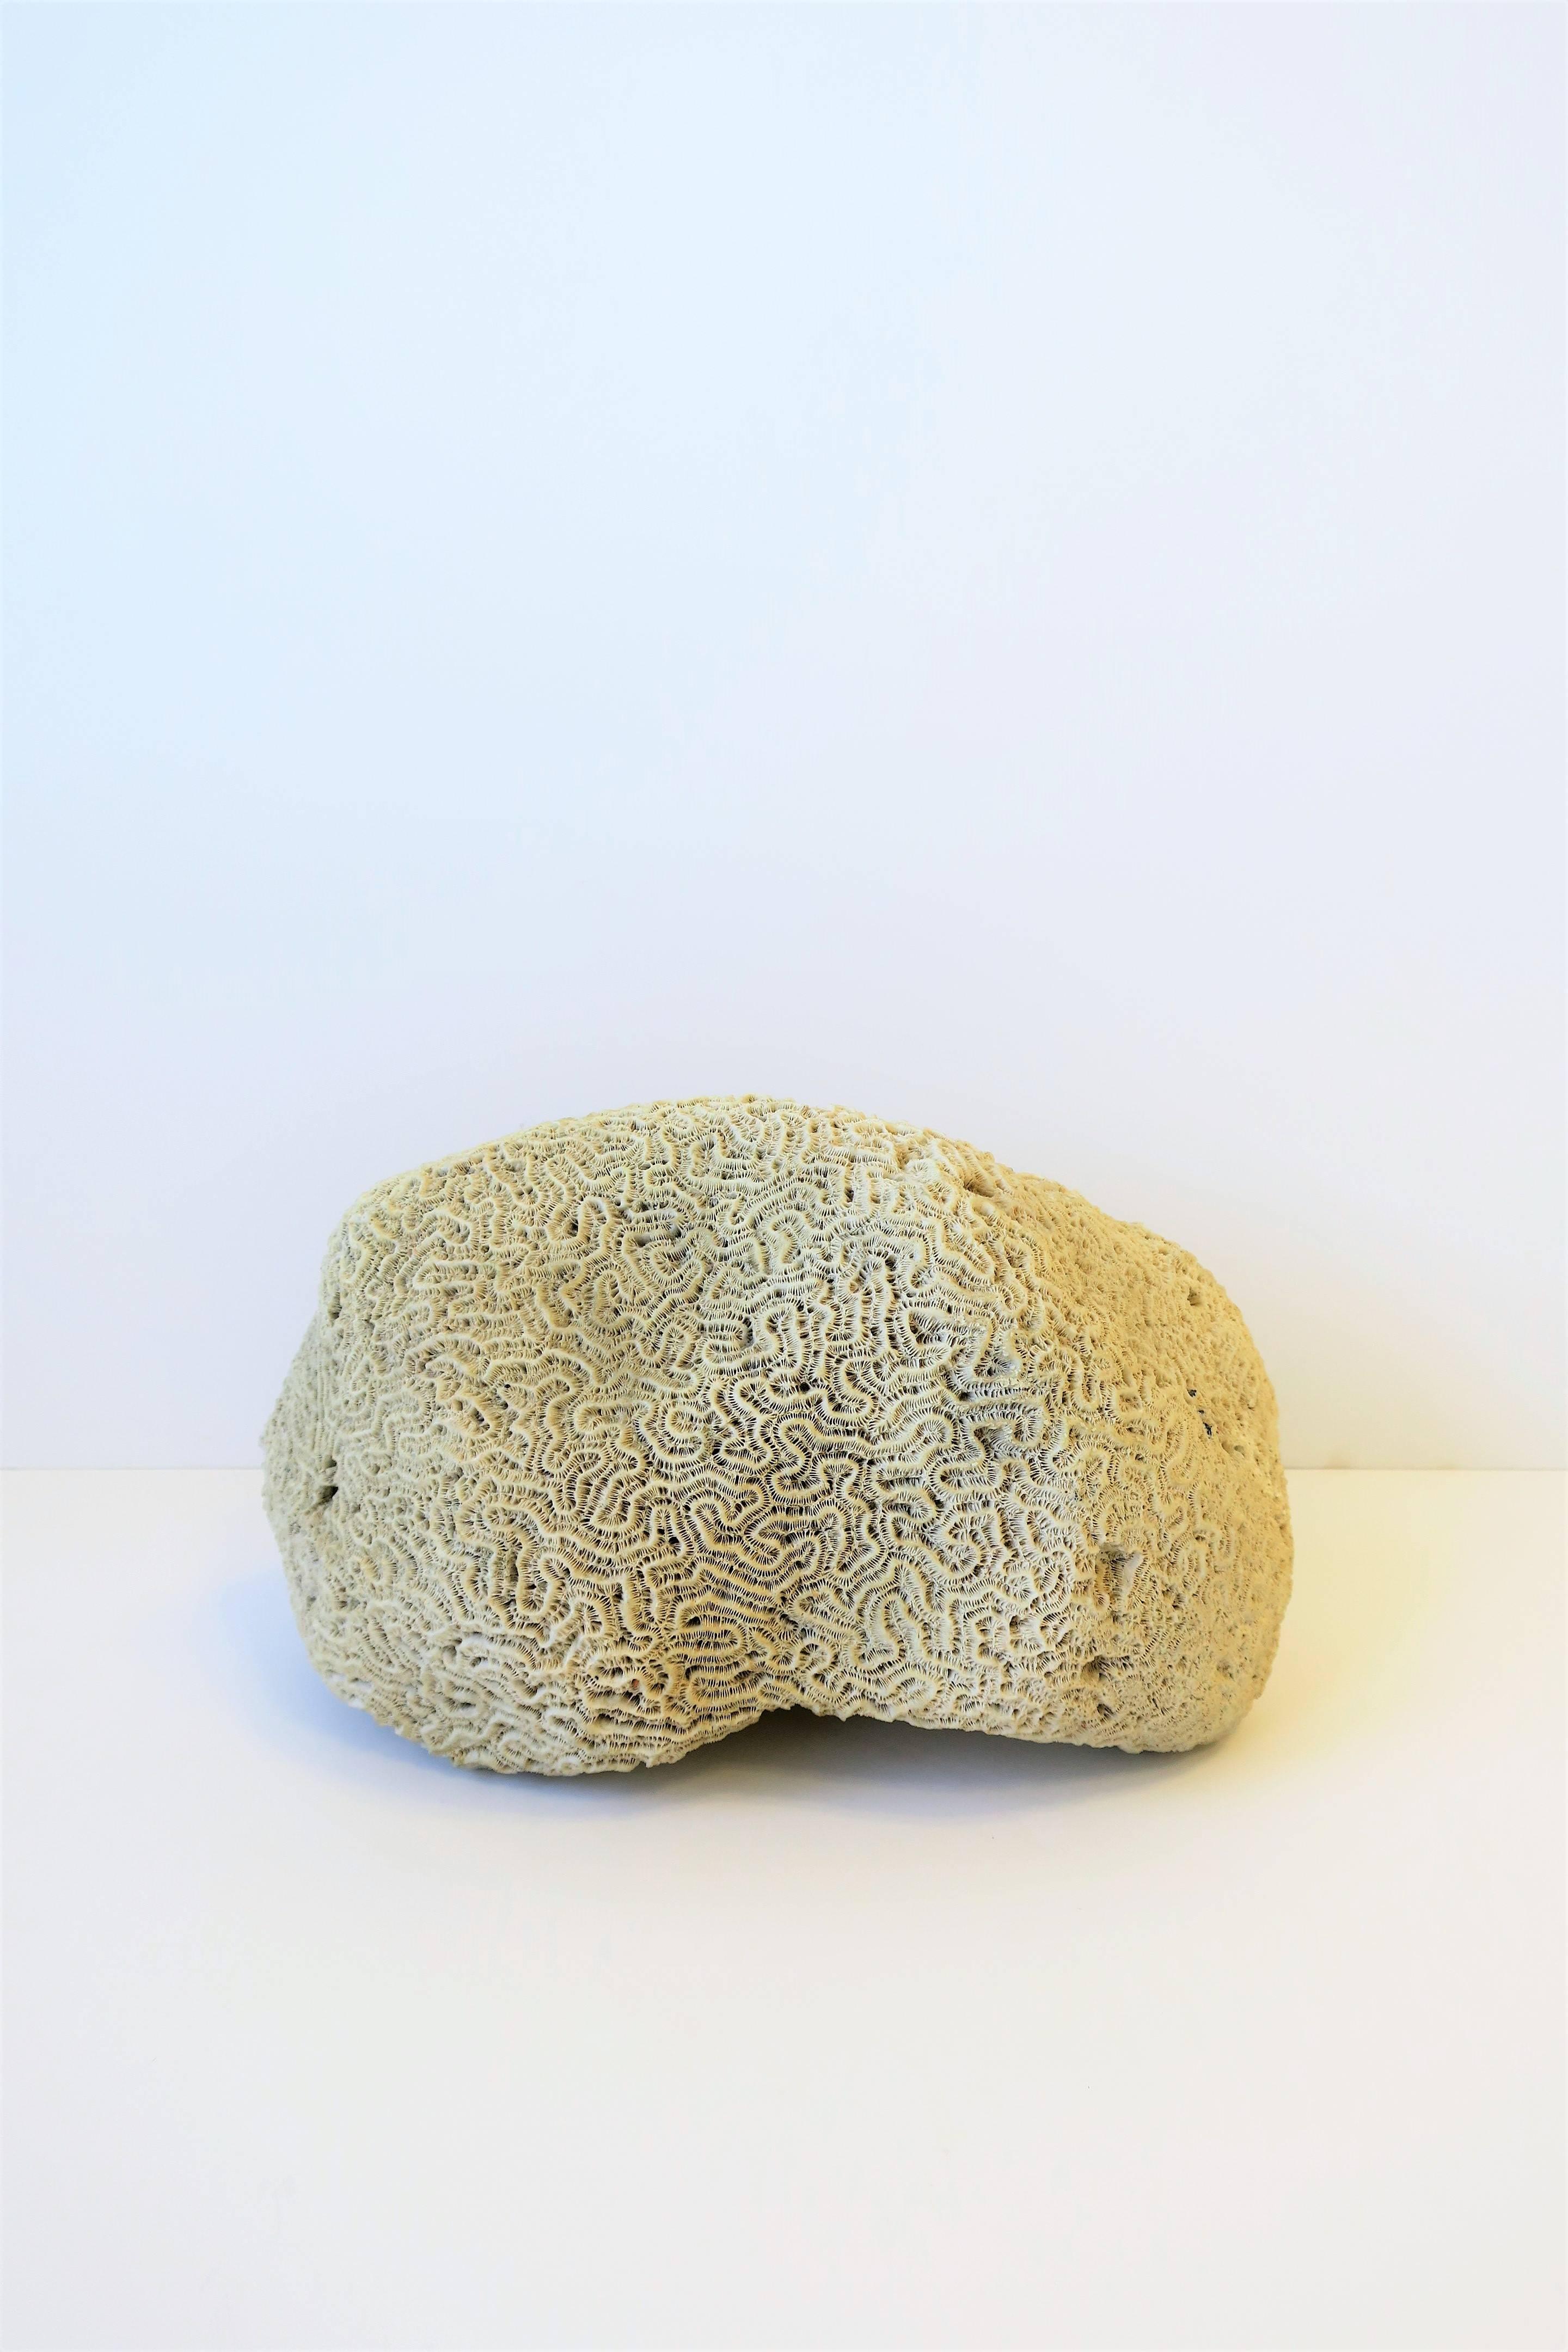 A substantial and relatively large piece/fragment of natural brain coral. Use as a standalone decorative object, centerpiece, on a shelf, as a bookend, as a luxury display piece, etc. Natural white/off-white/stone-white hue.  Dimensions: 5